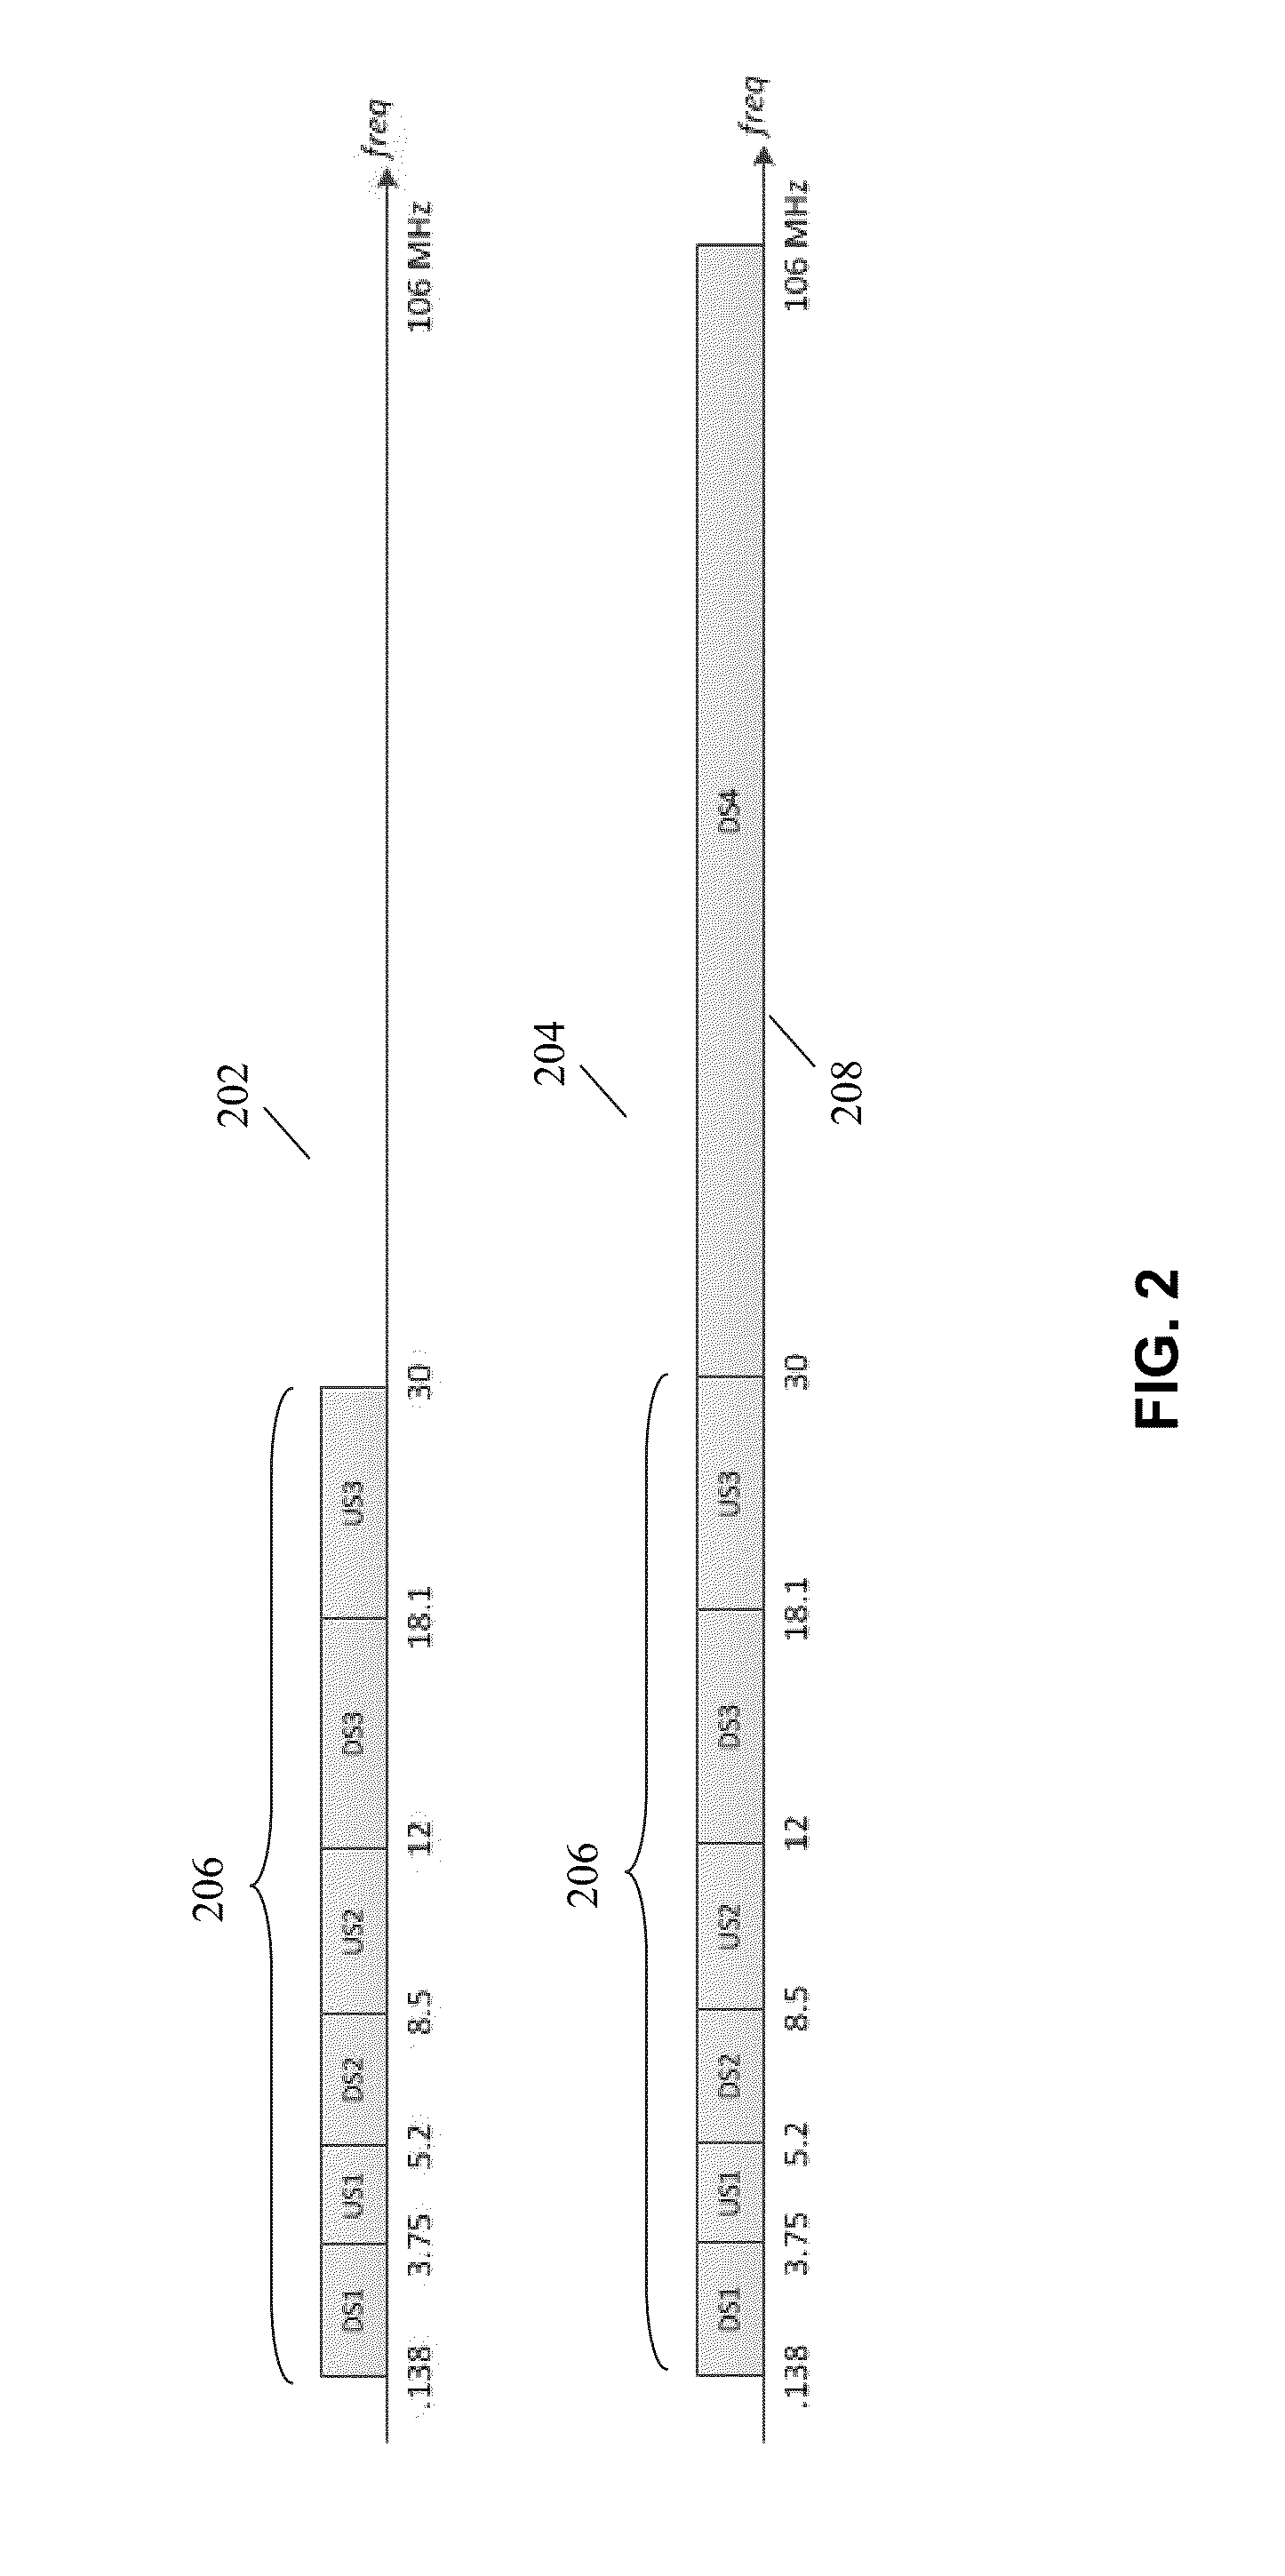 Methods and systems for maintaining spectral compatibility between co-existing legacy and wideband DSL services